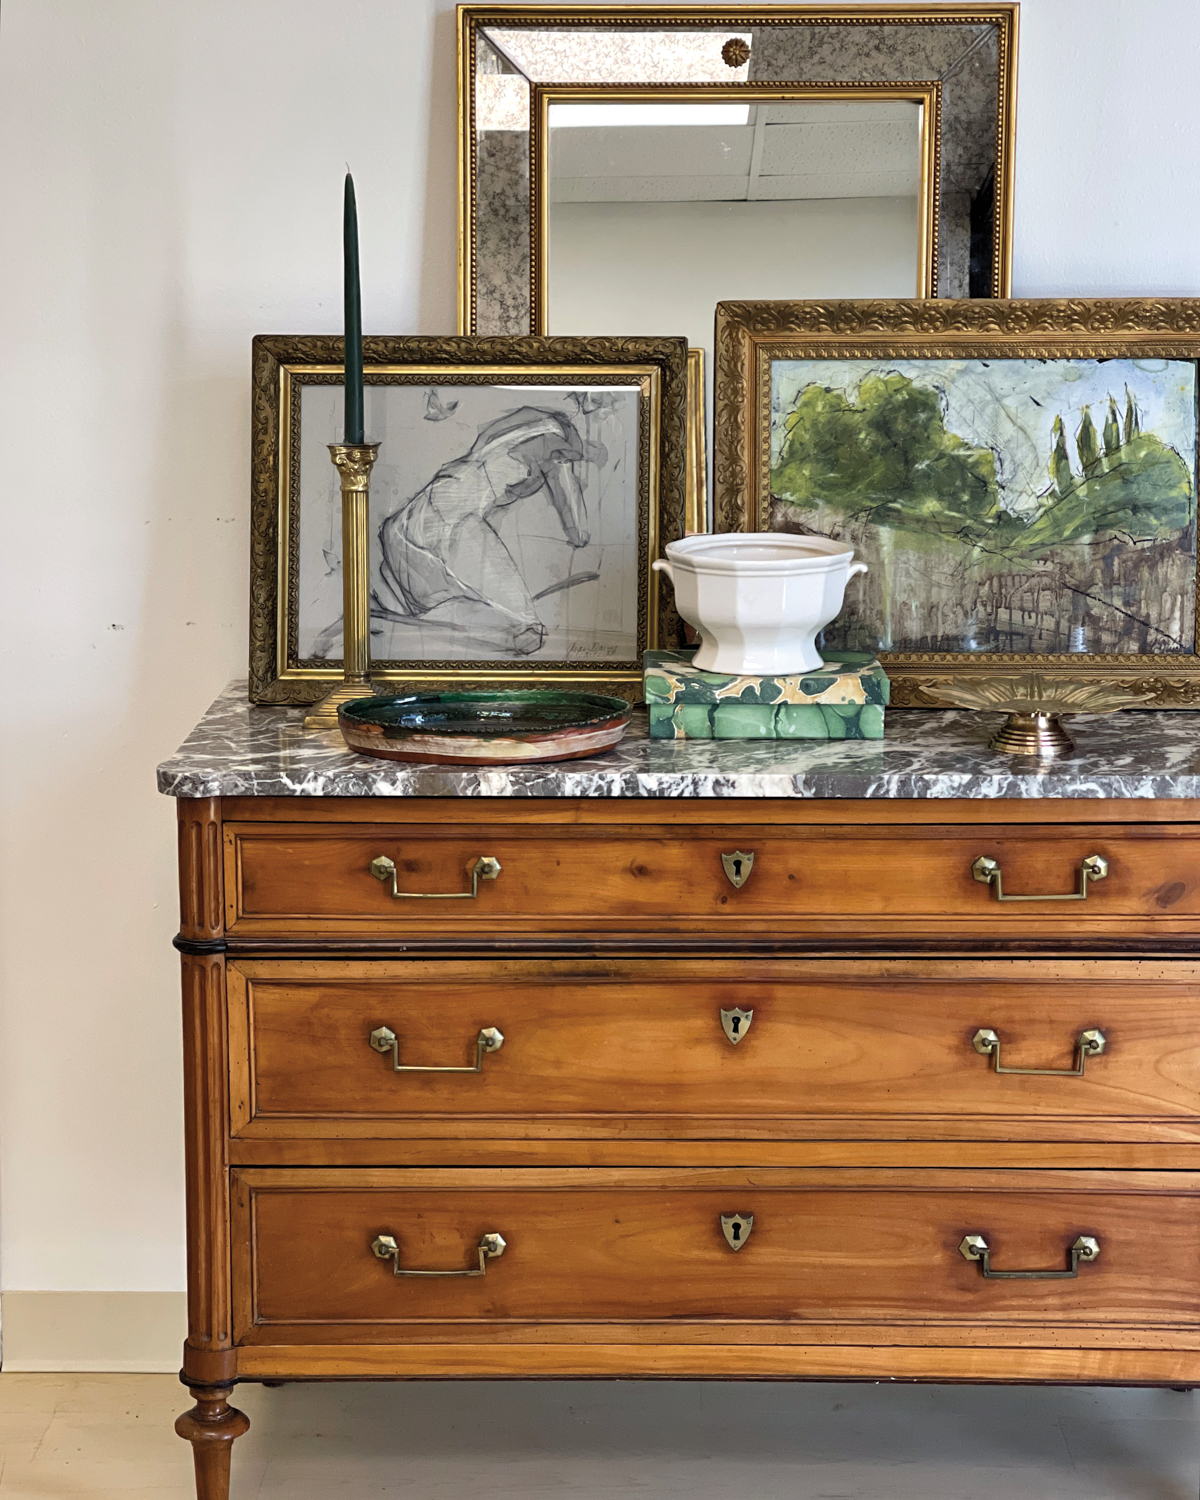 Low wooden dresser with a marble top styled with framed artworks and decorative dishes.